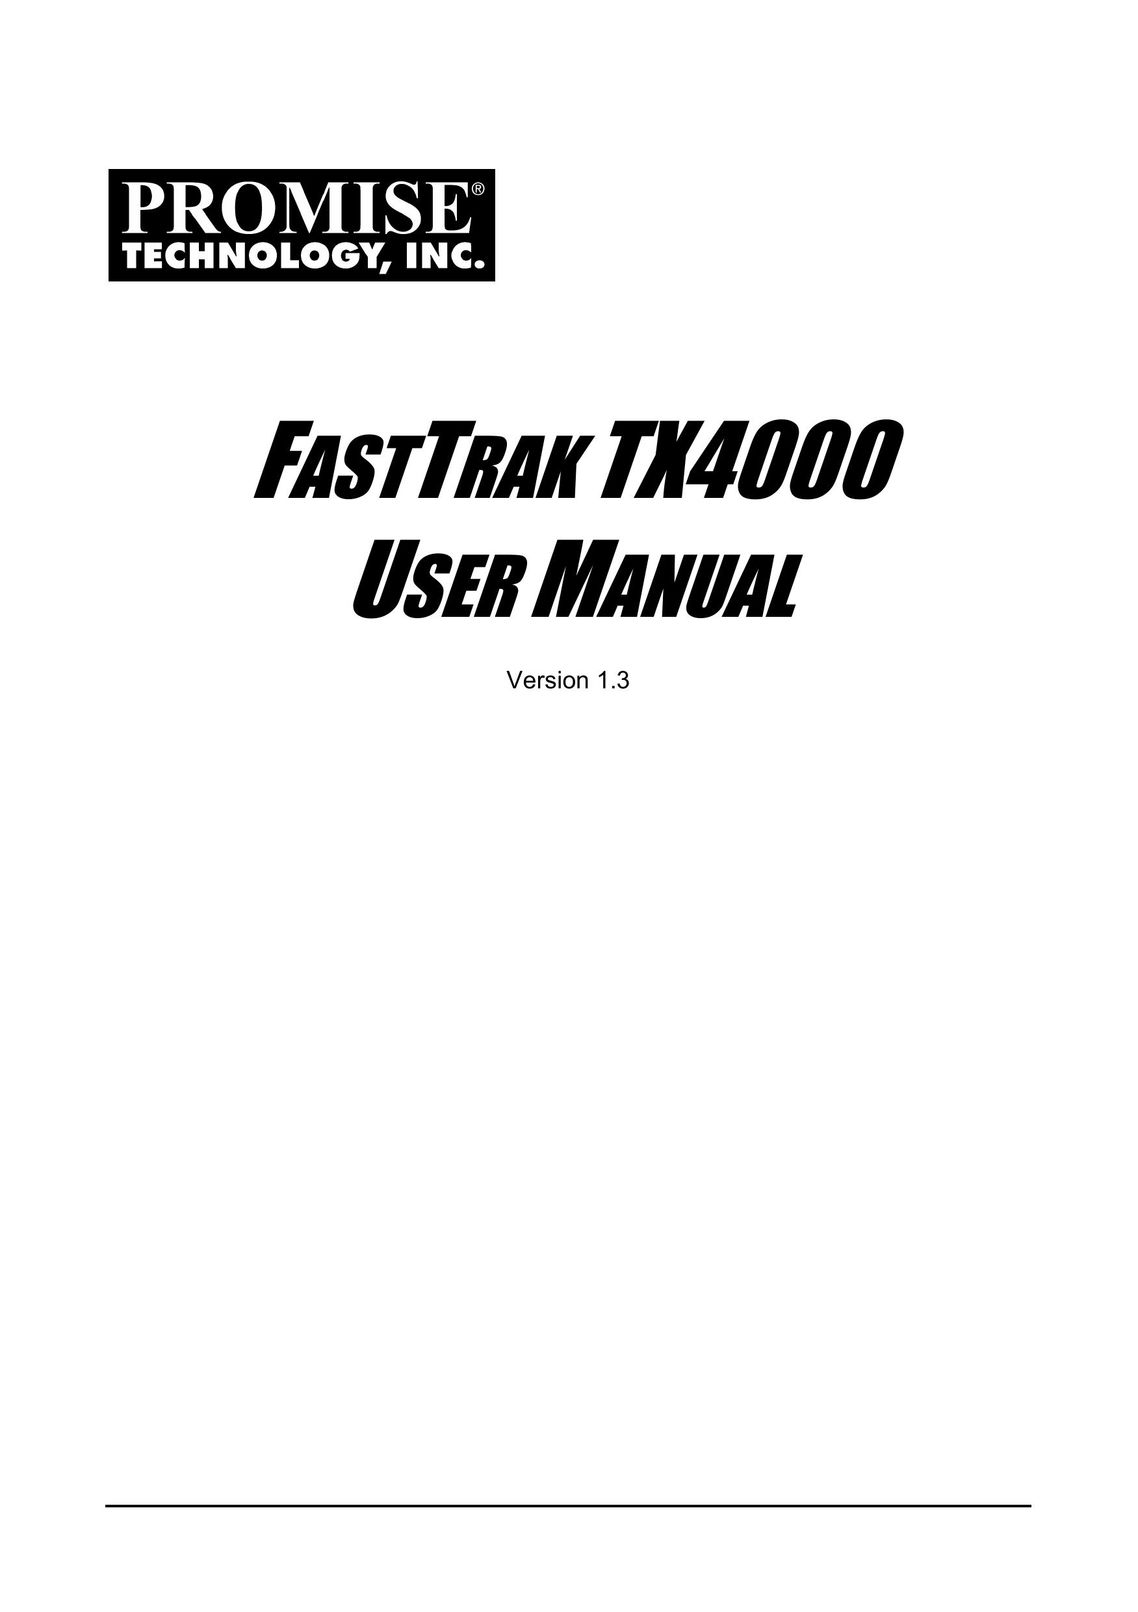 Promise Technology TX4000 Network Card User Manual